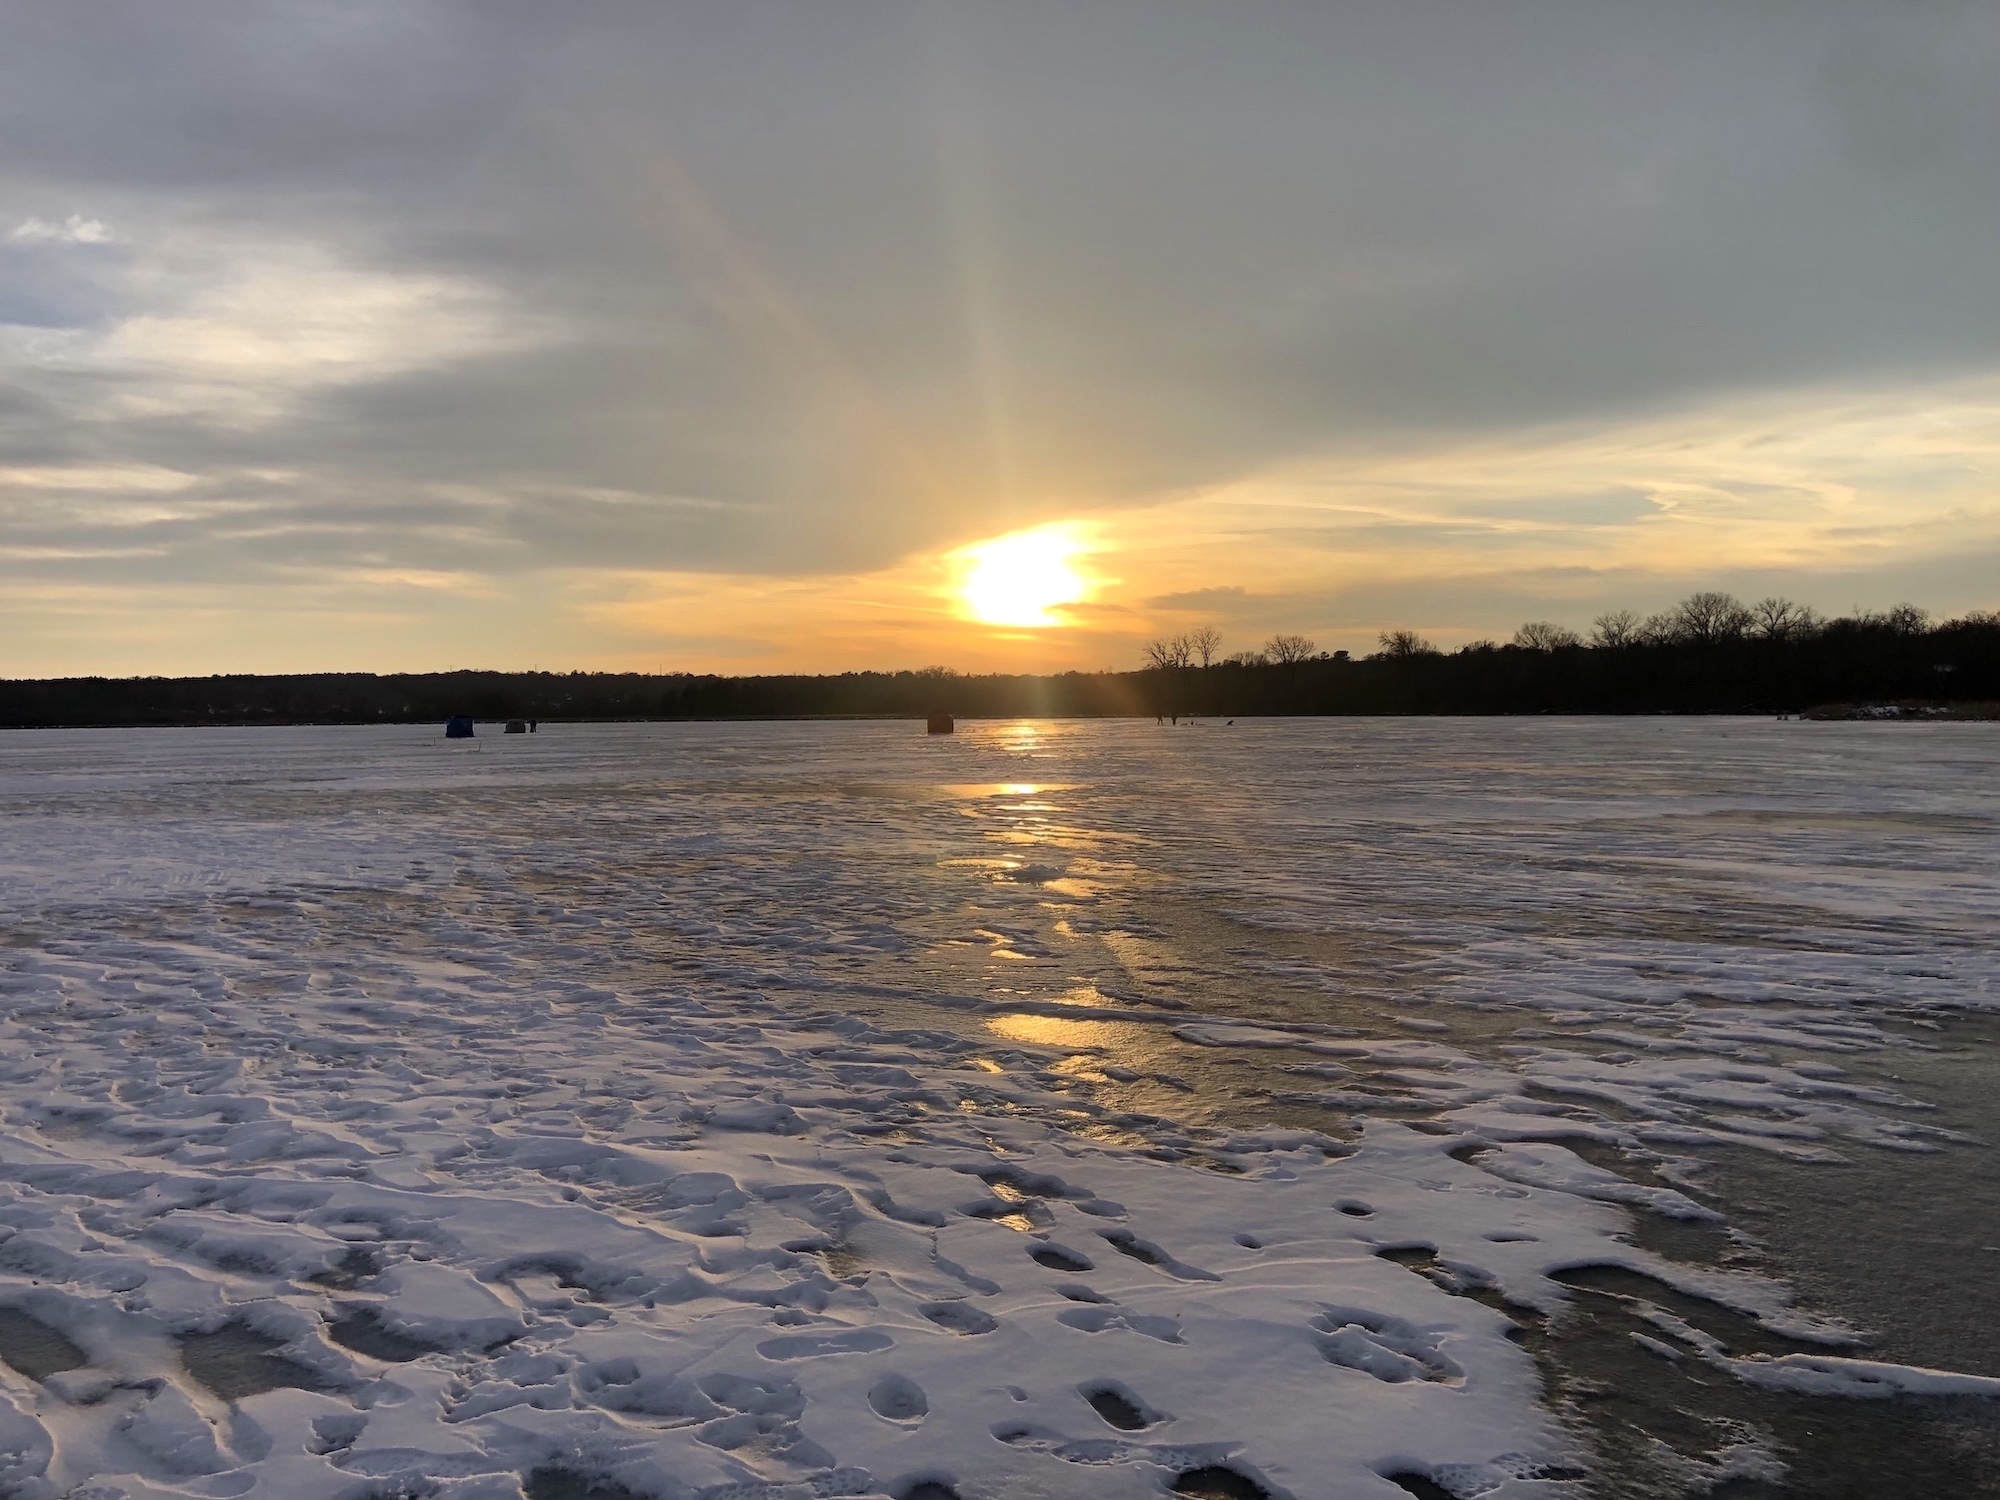 Lake Wingra looking west at sunset on the afternoon of December 28, 2022.